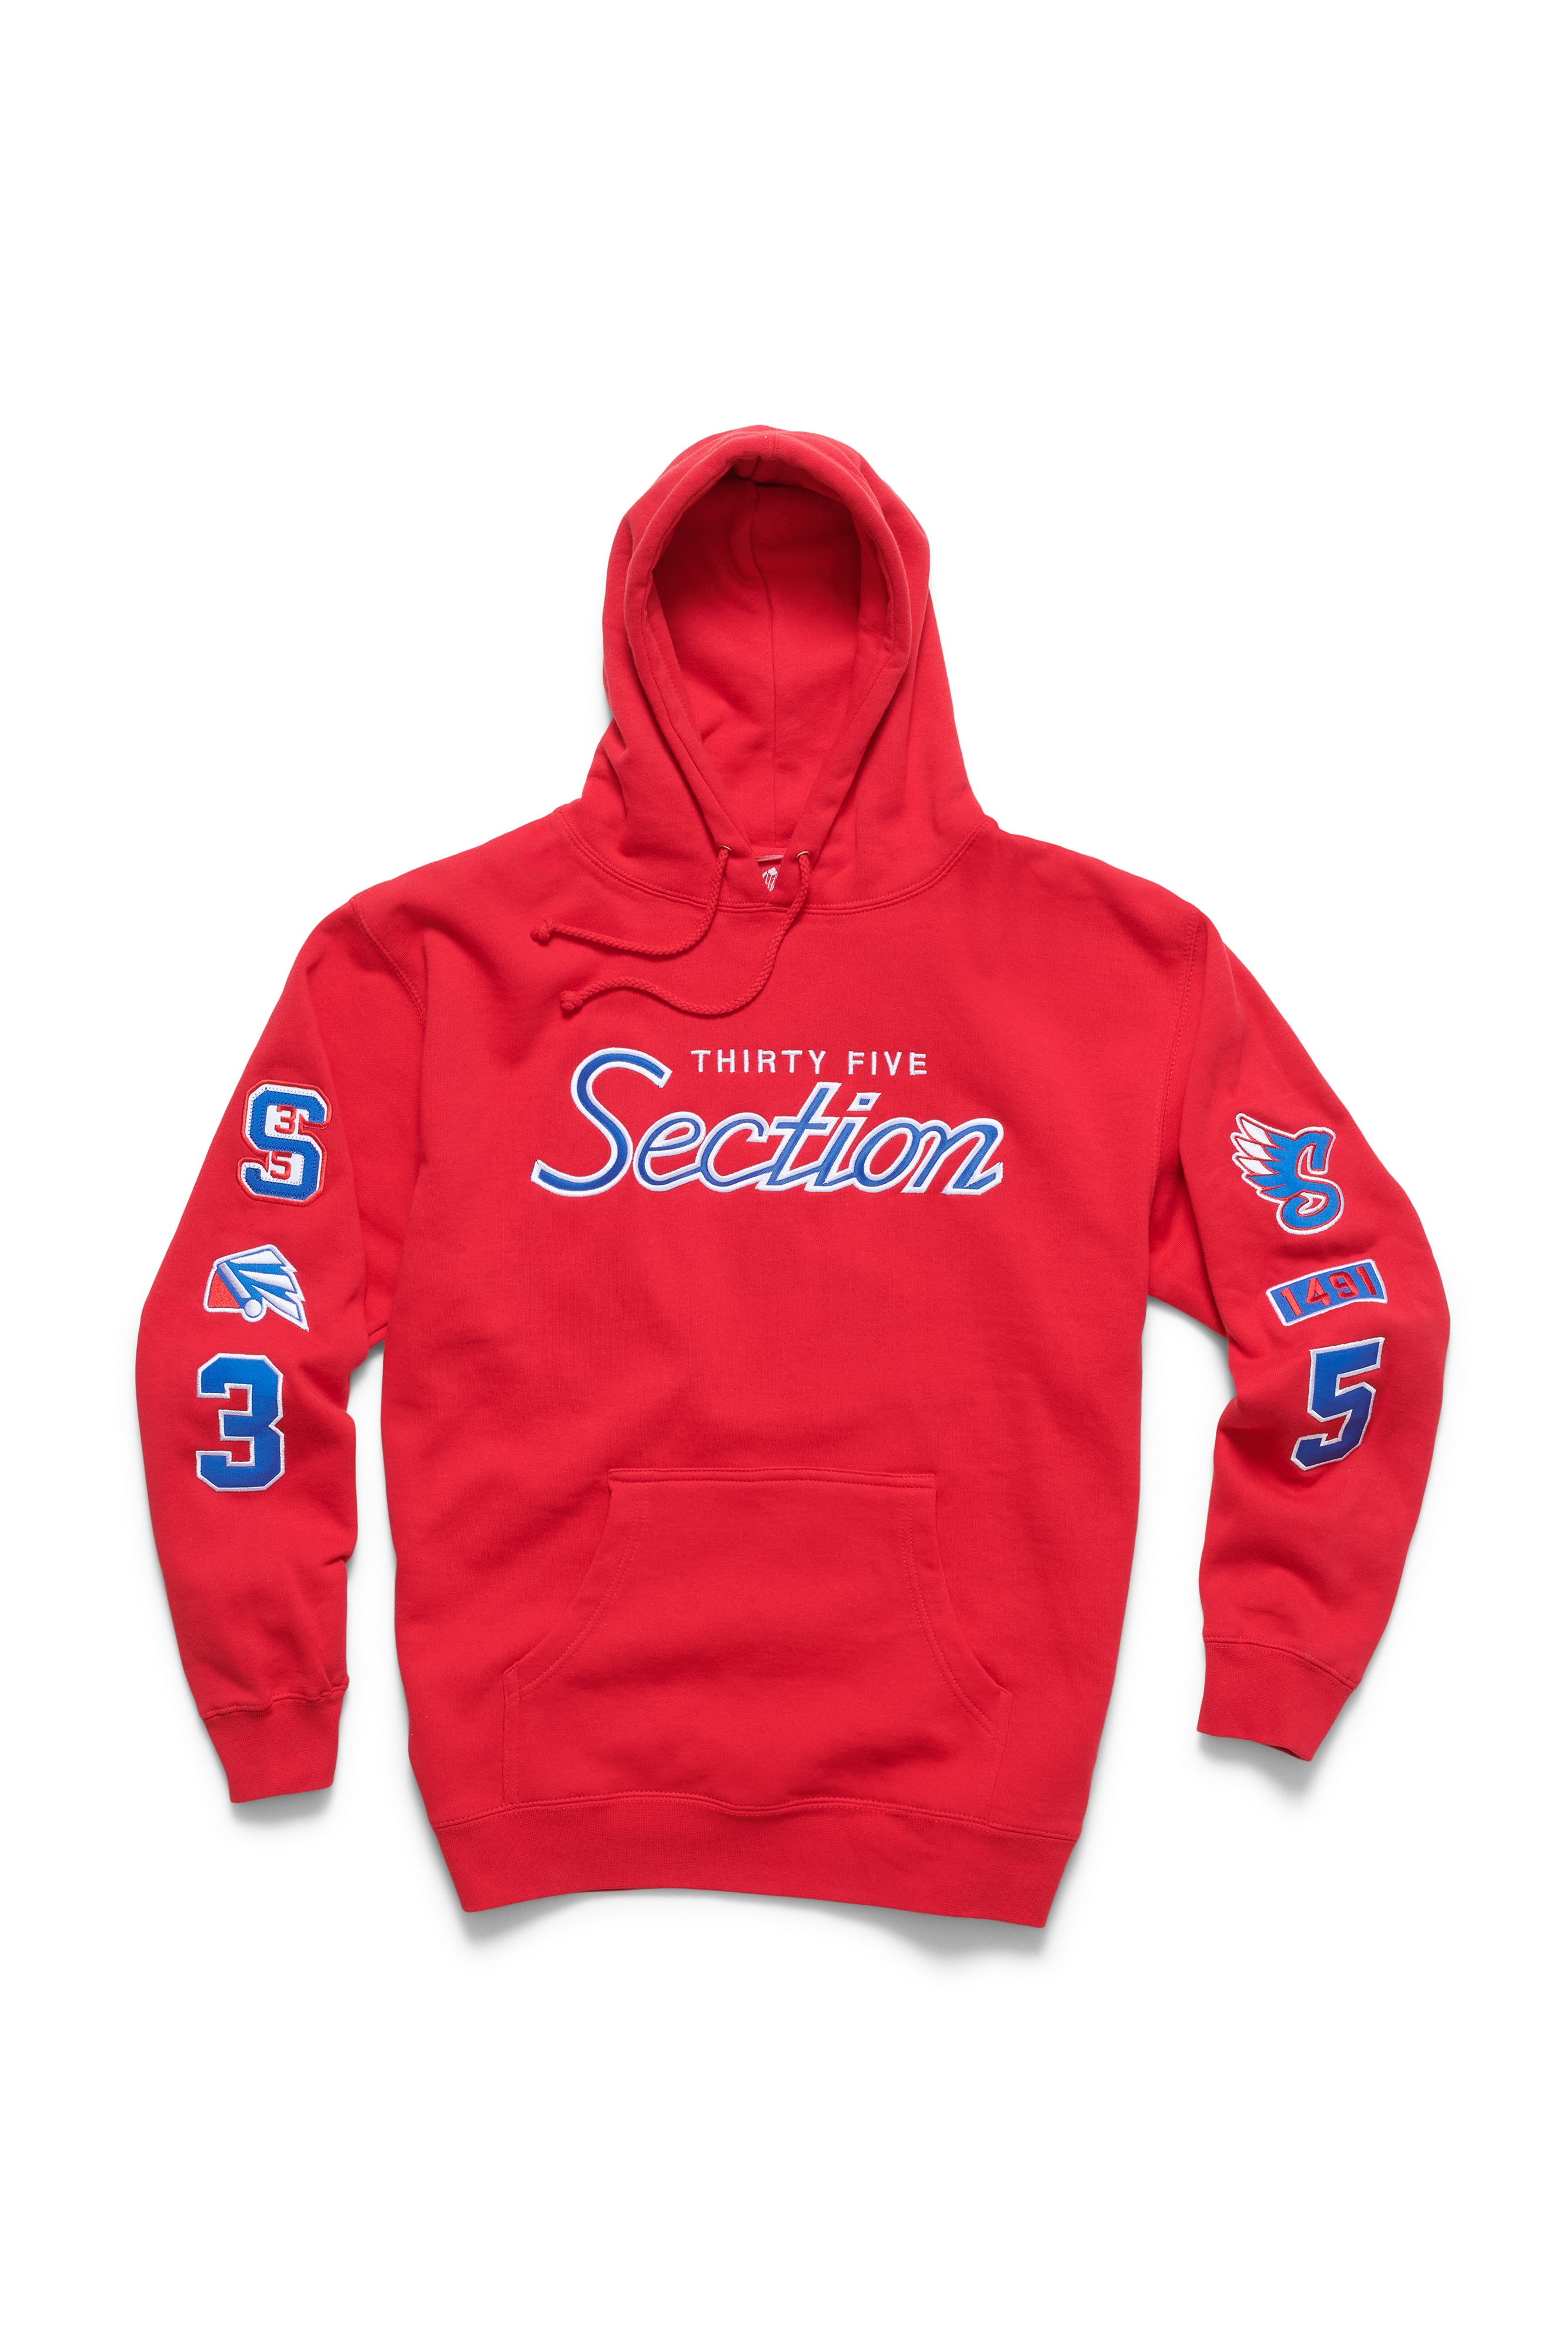 GOAT Patched Hoodie - Red